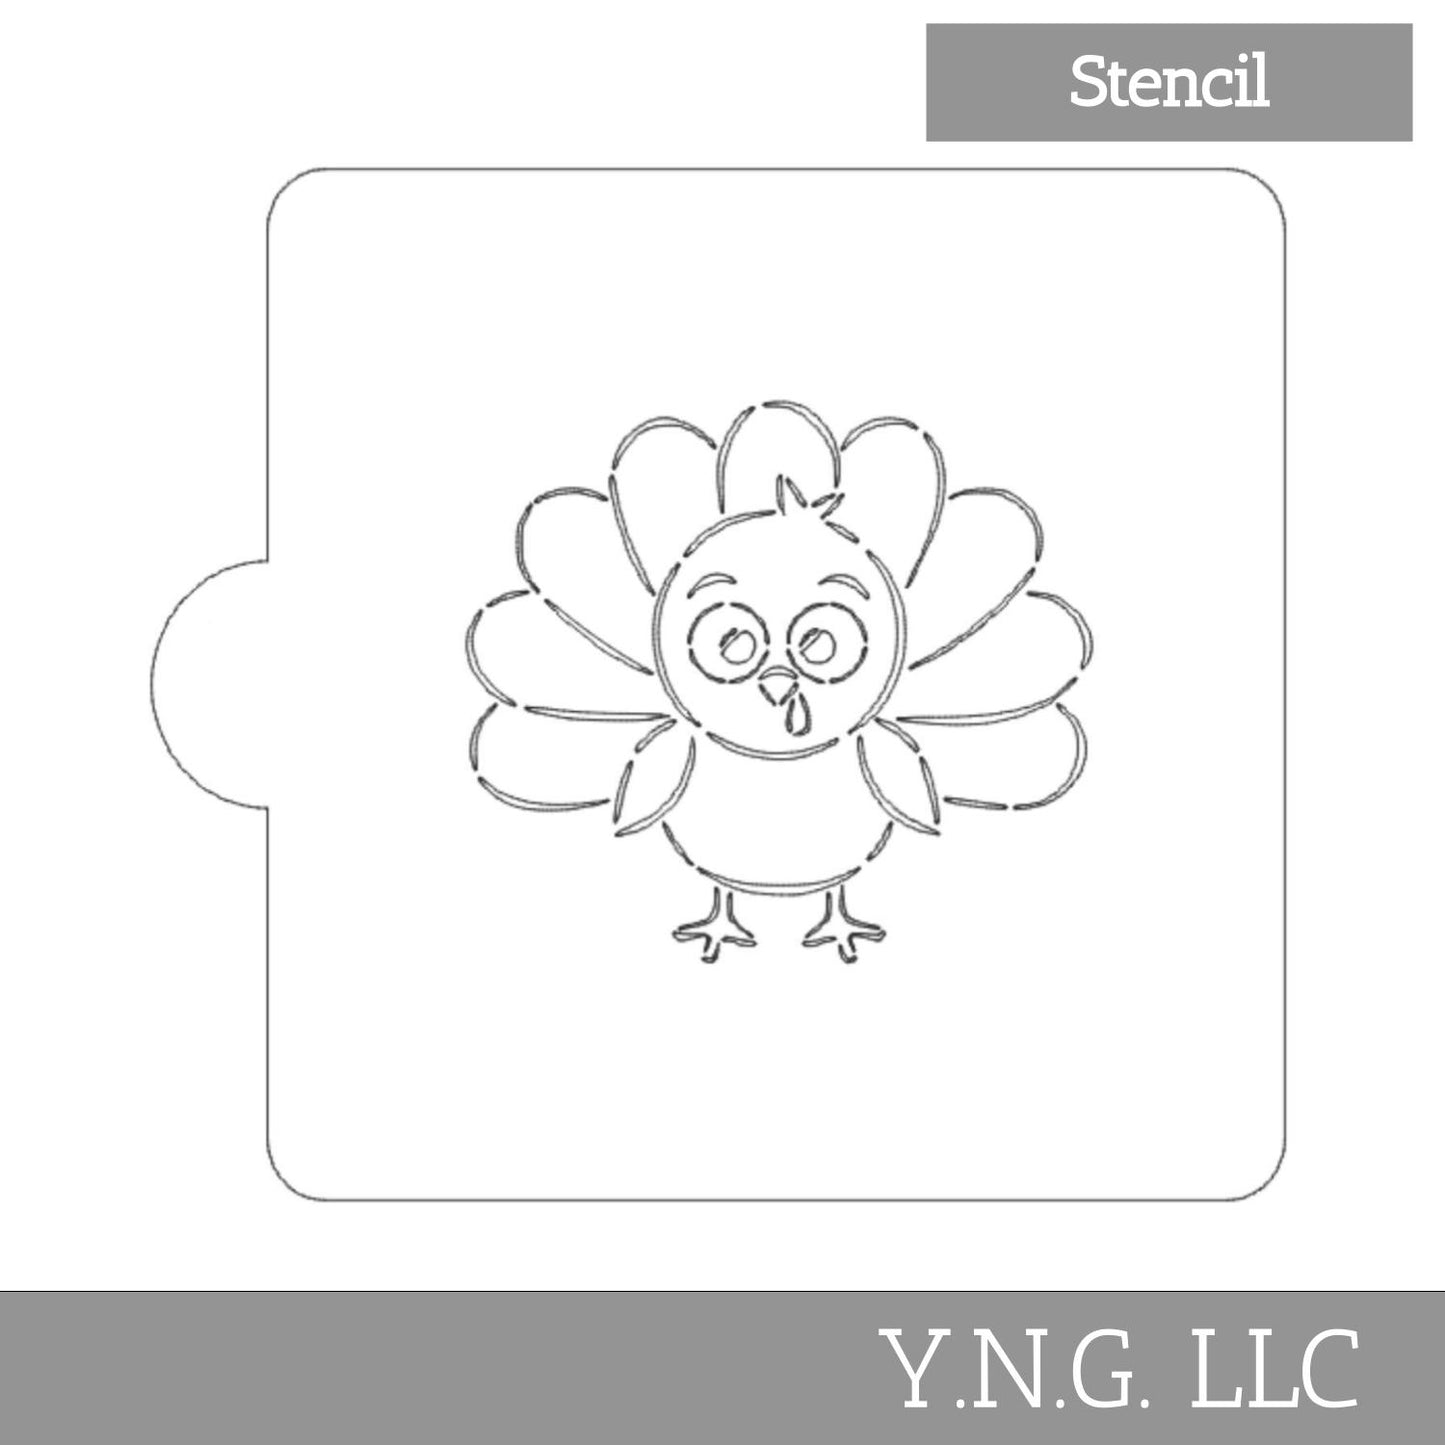 Turkey Cartoon Animal Stencil for Cookies or Cakes USA Made LS9057